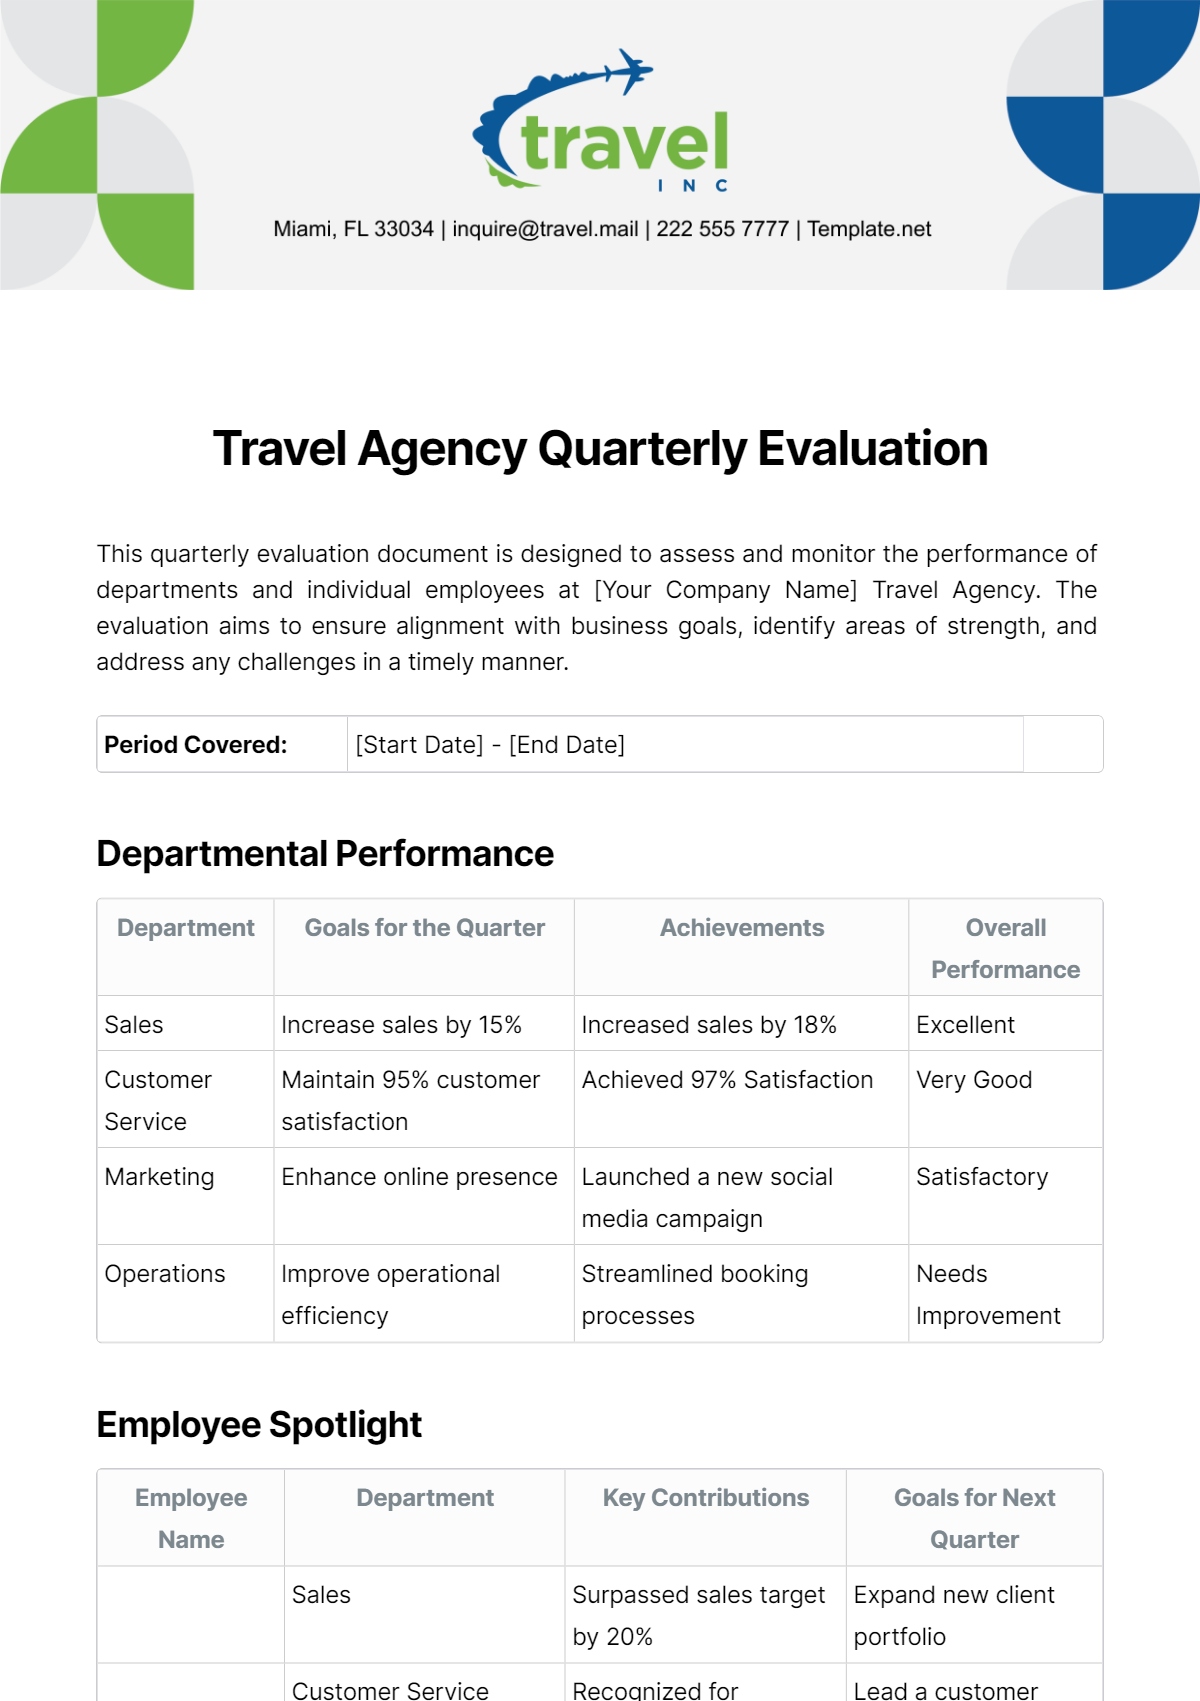 Free Travel Agency Quarterly Evaluation Template